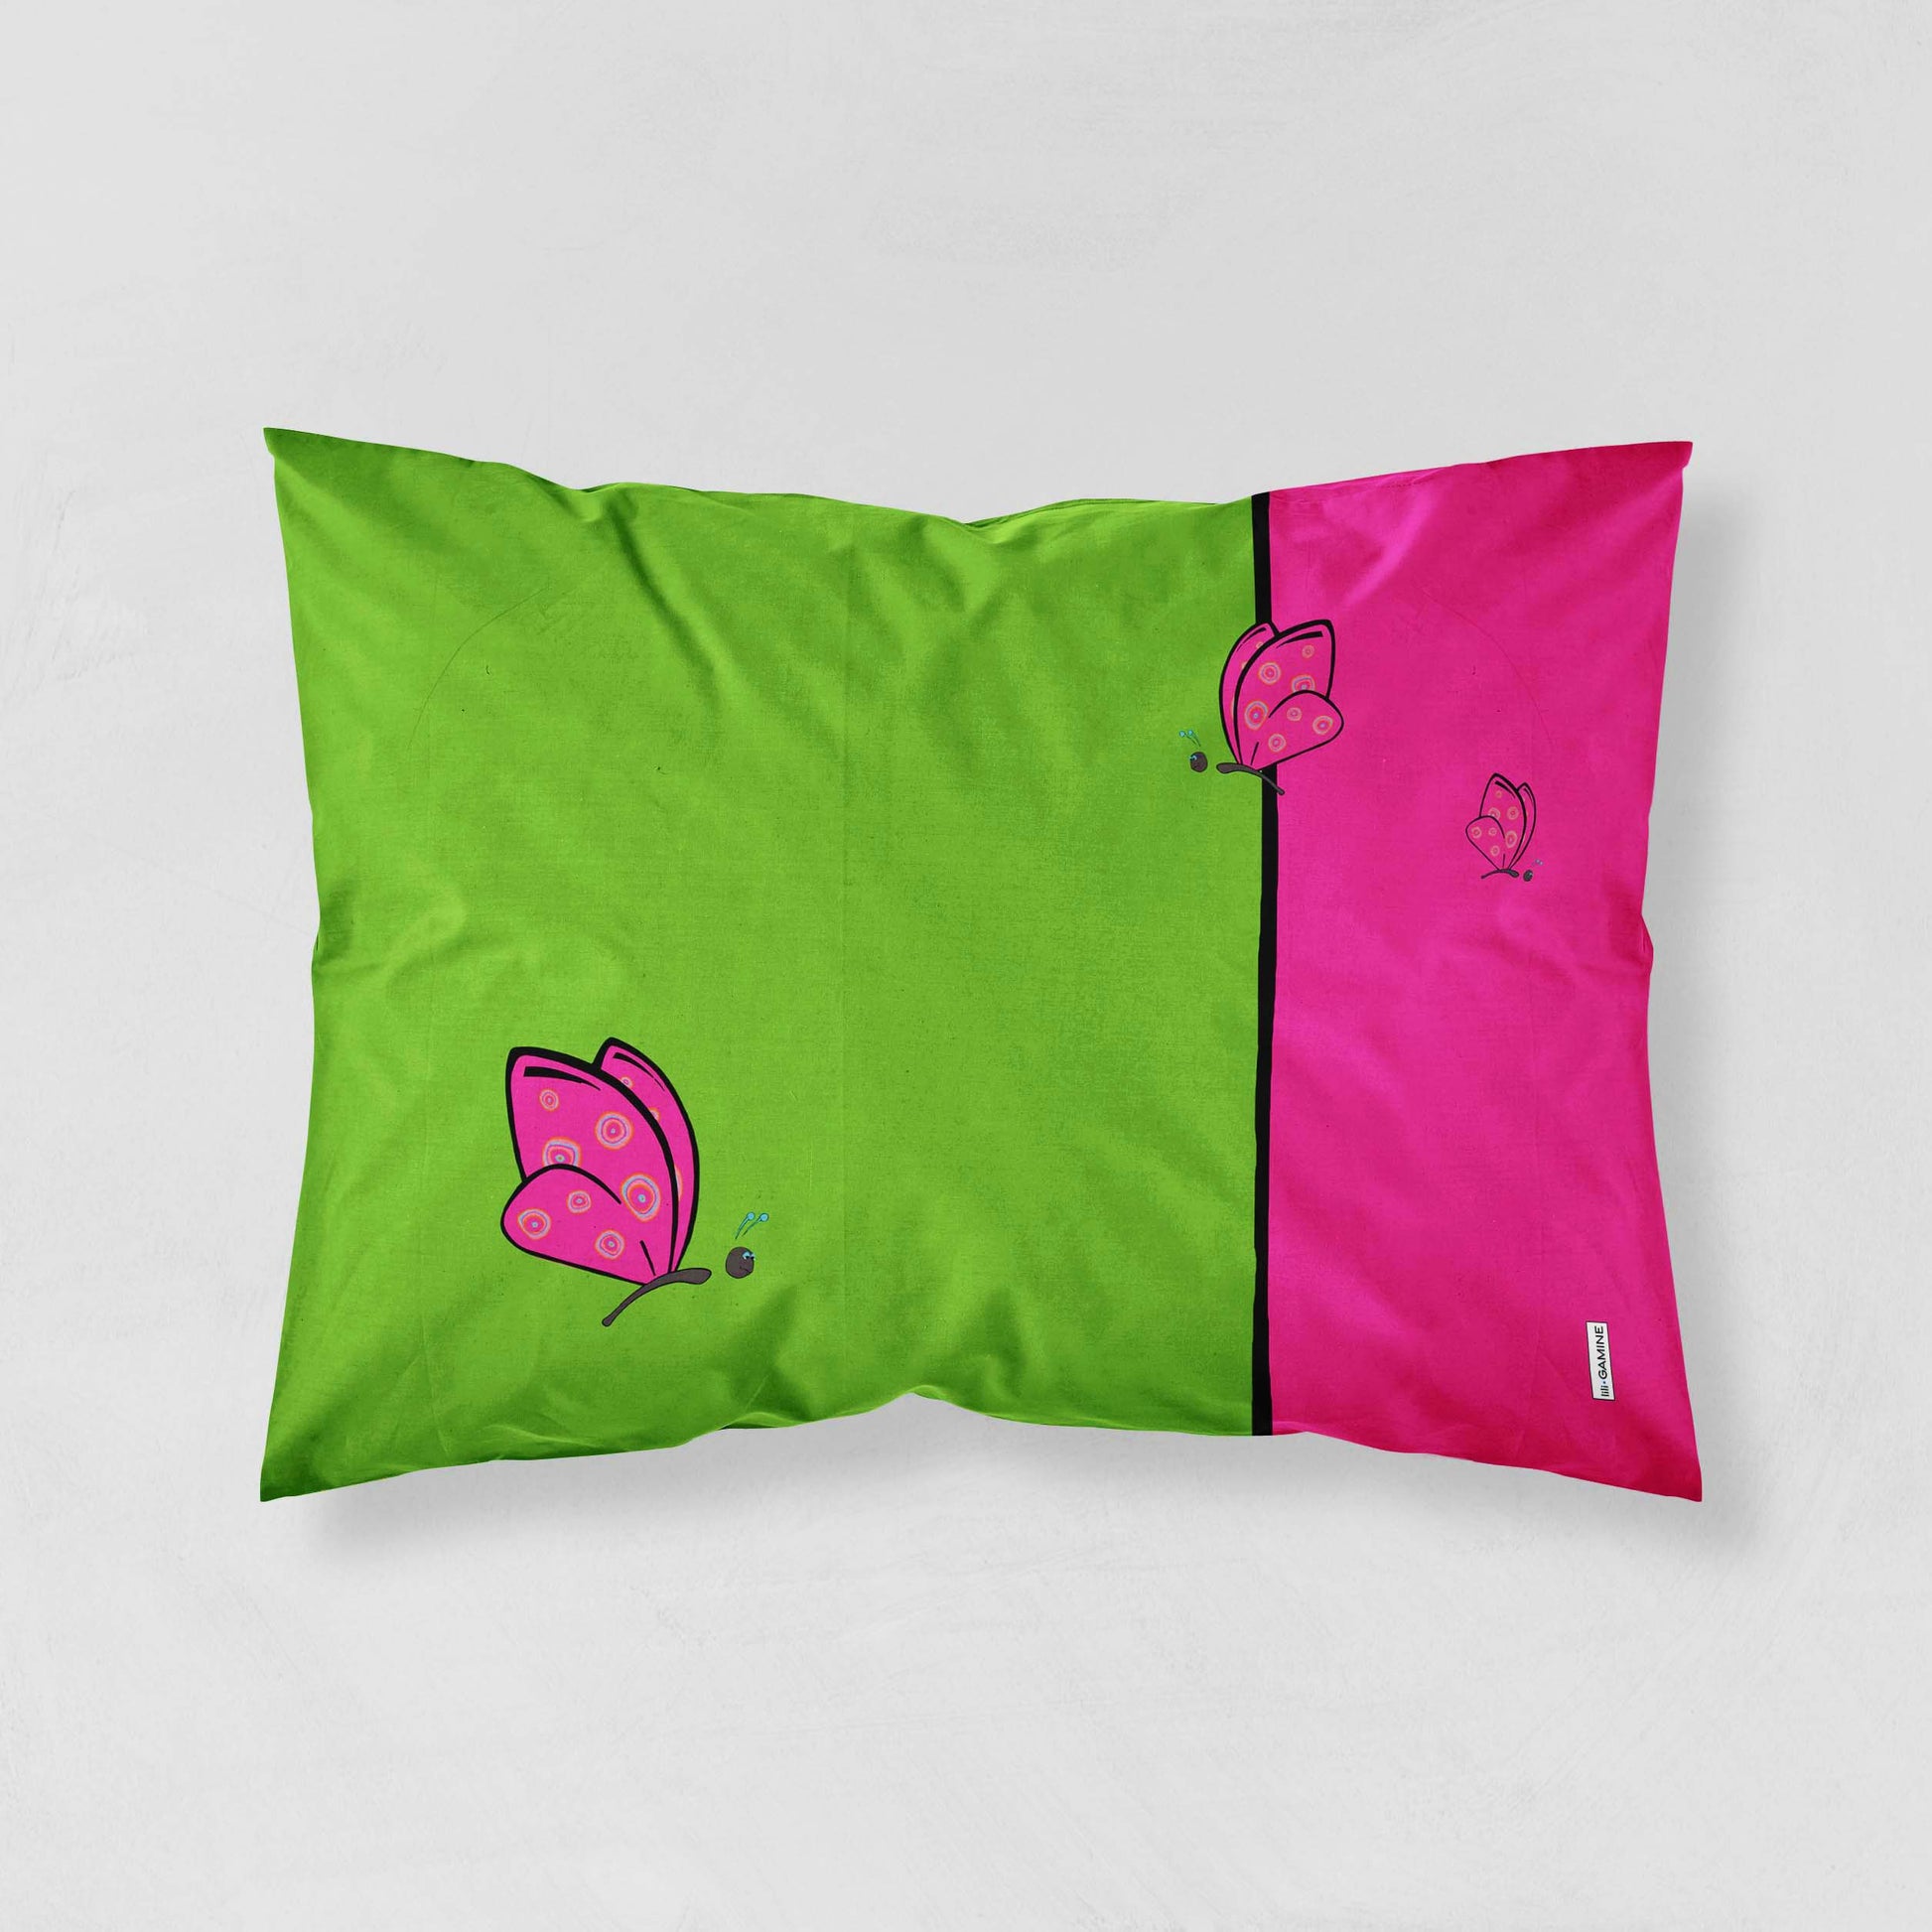 Butterfly Pillow Case by Lili Gamine